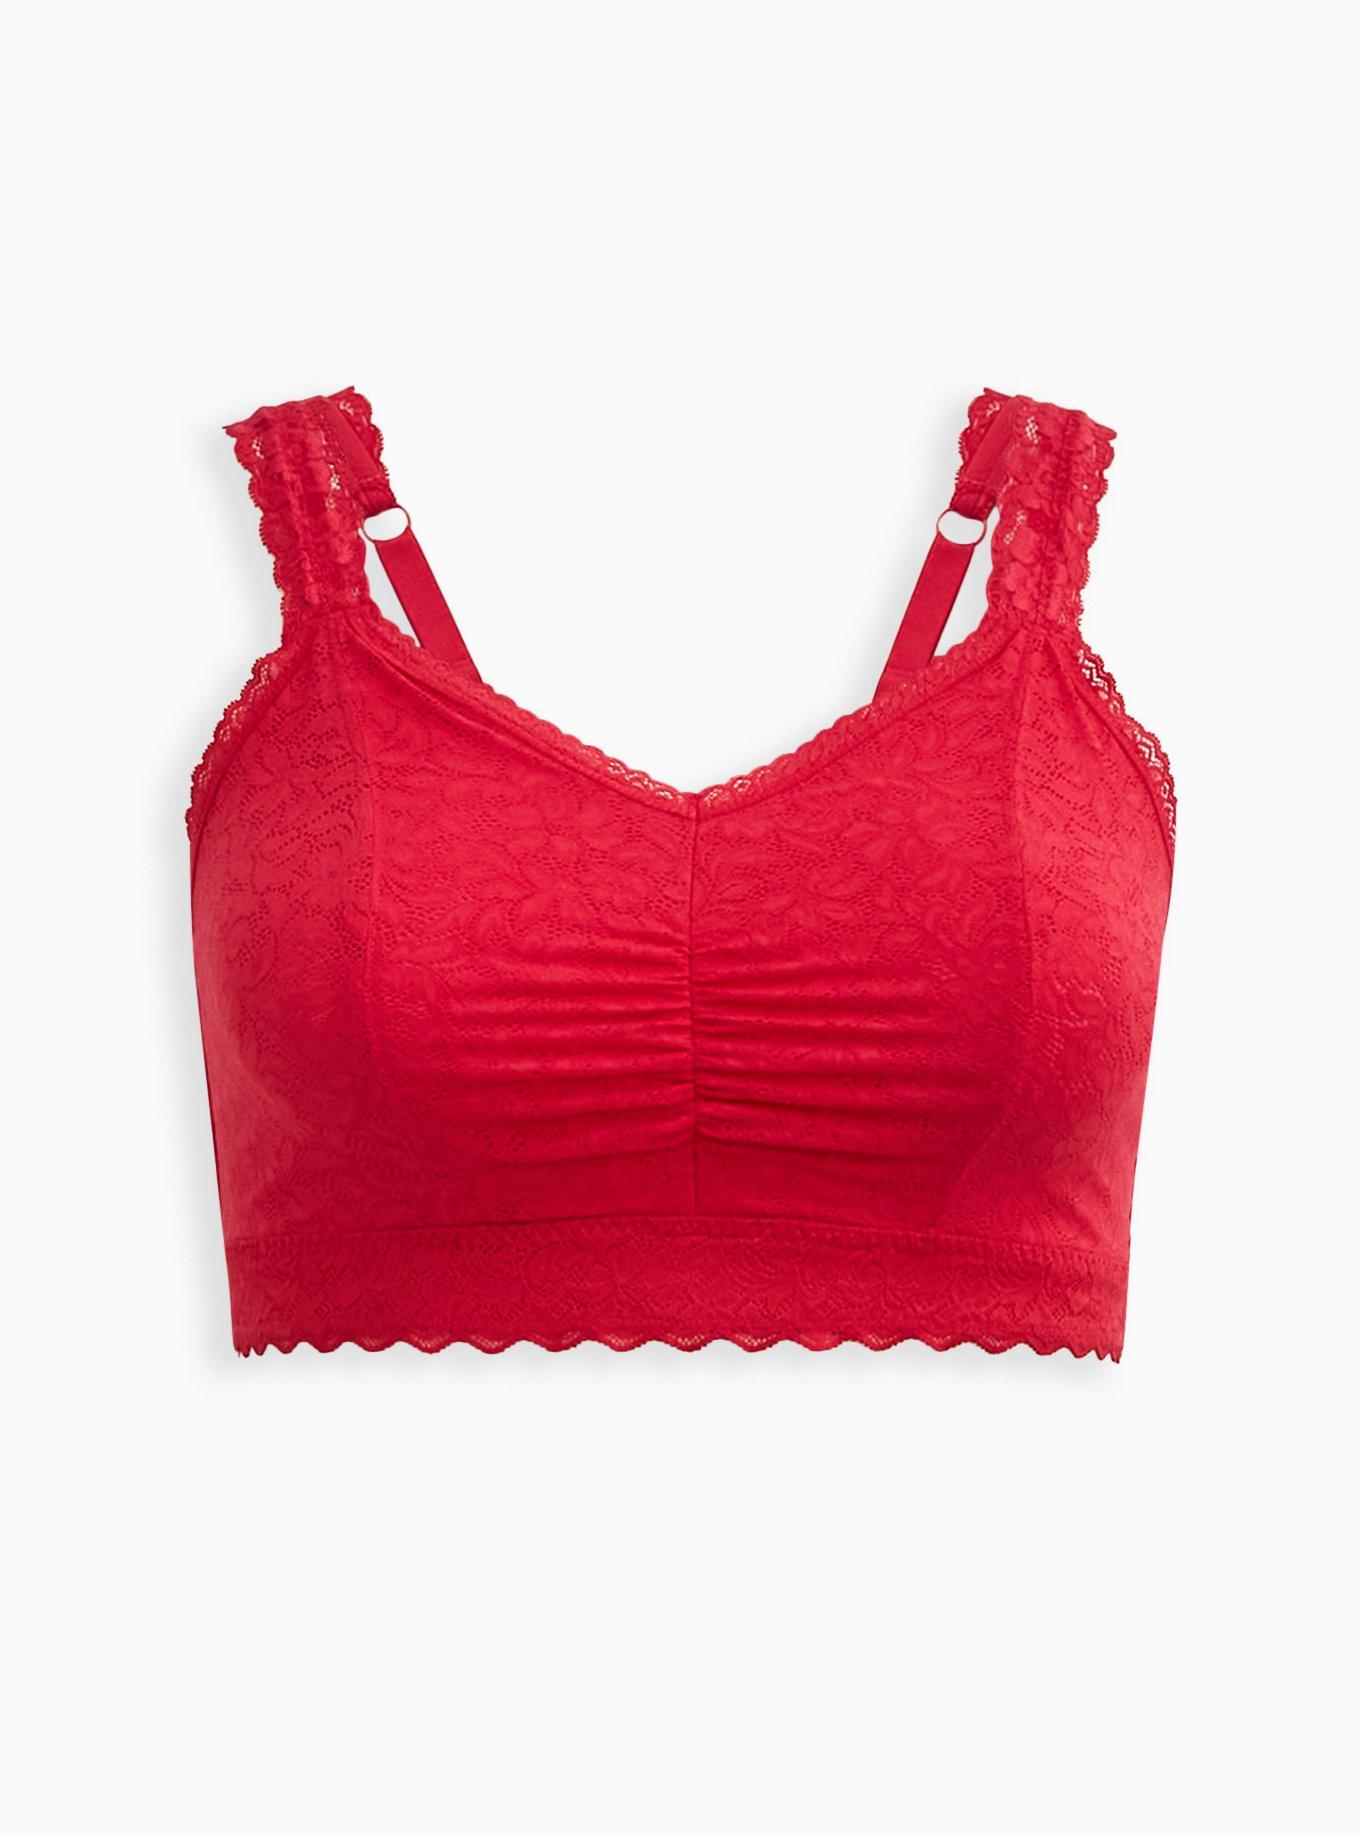 Torrid 1 (1x) Bralette BRIGHT BERRY LACE LIGHTLY PADDED BANDEAU